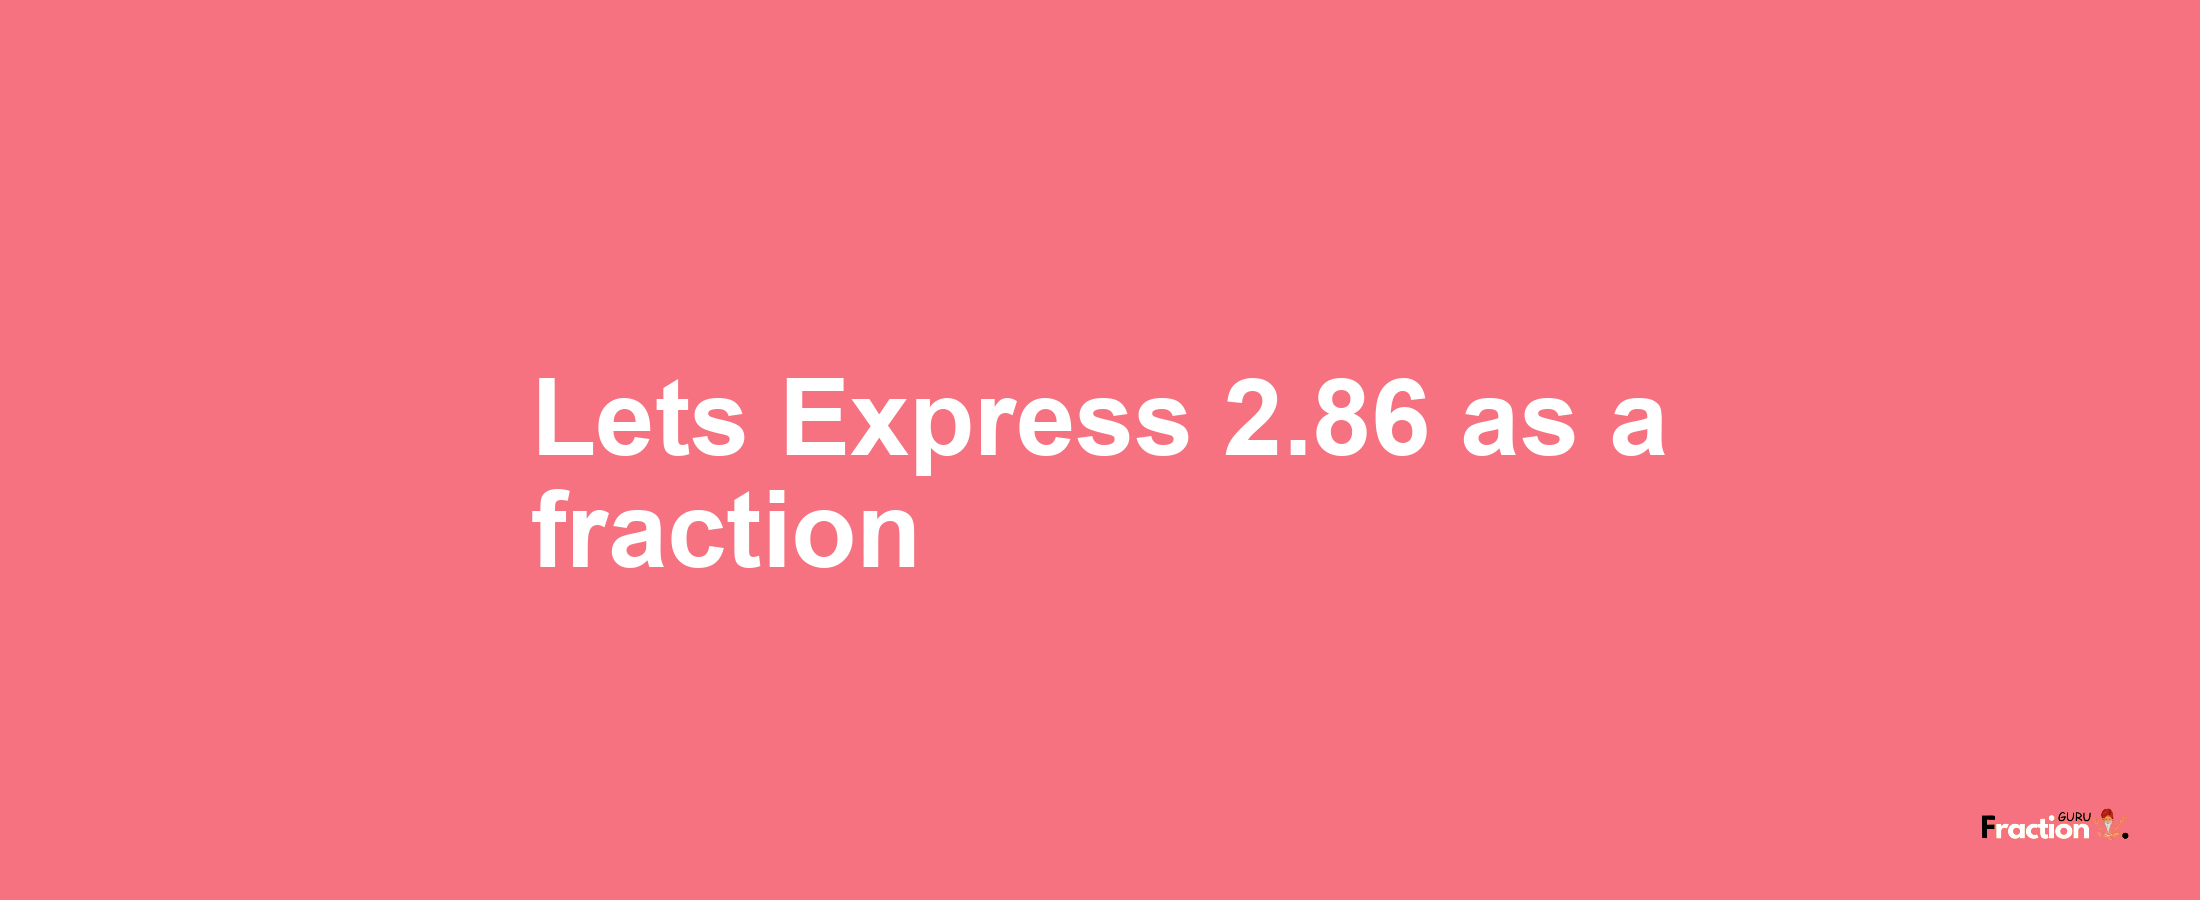 Lets Express 2.86 as afraction